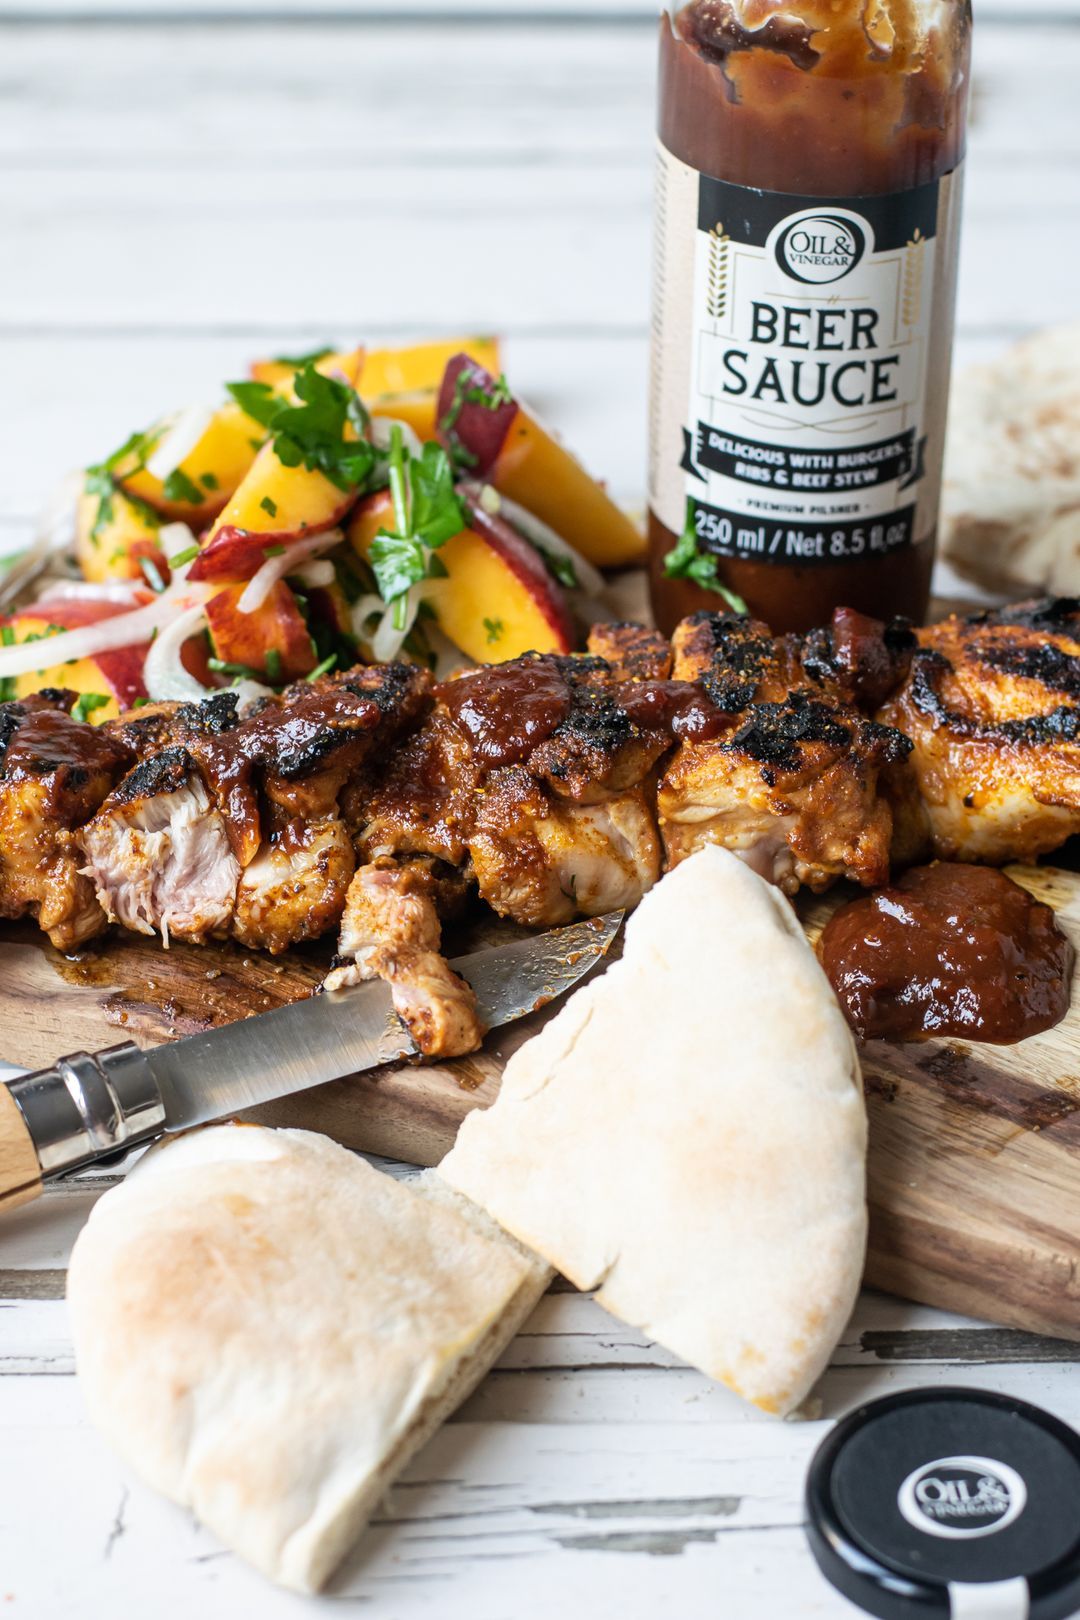 Chicken skewer with beer sauce and peach